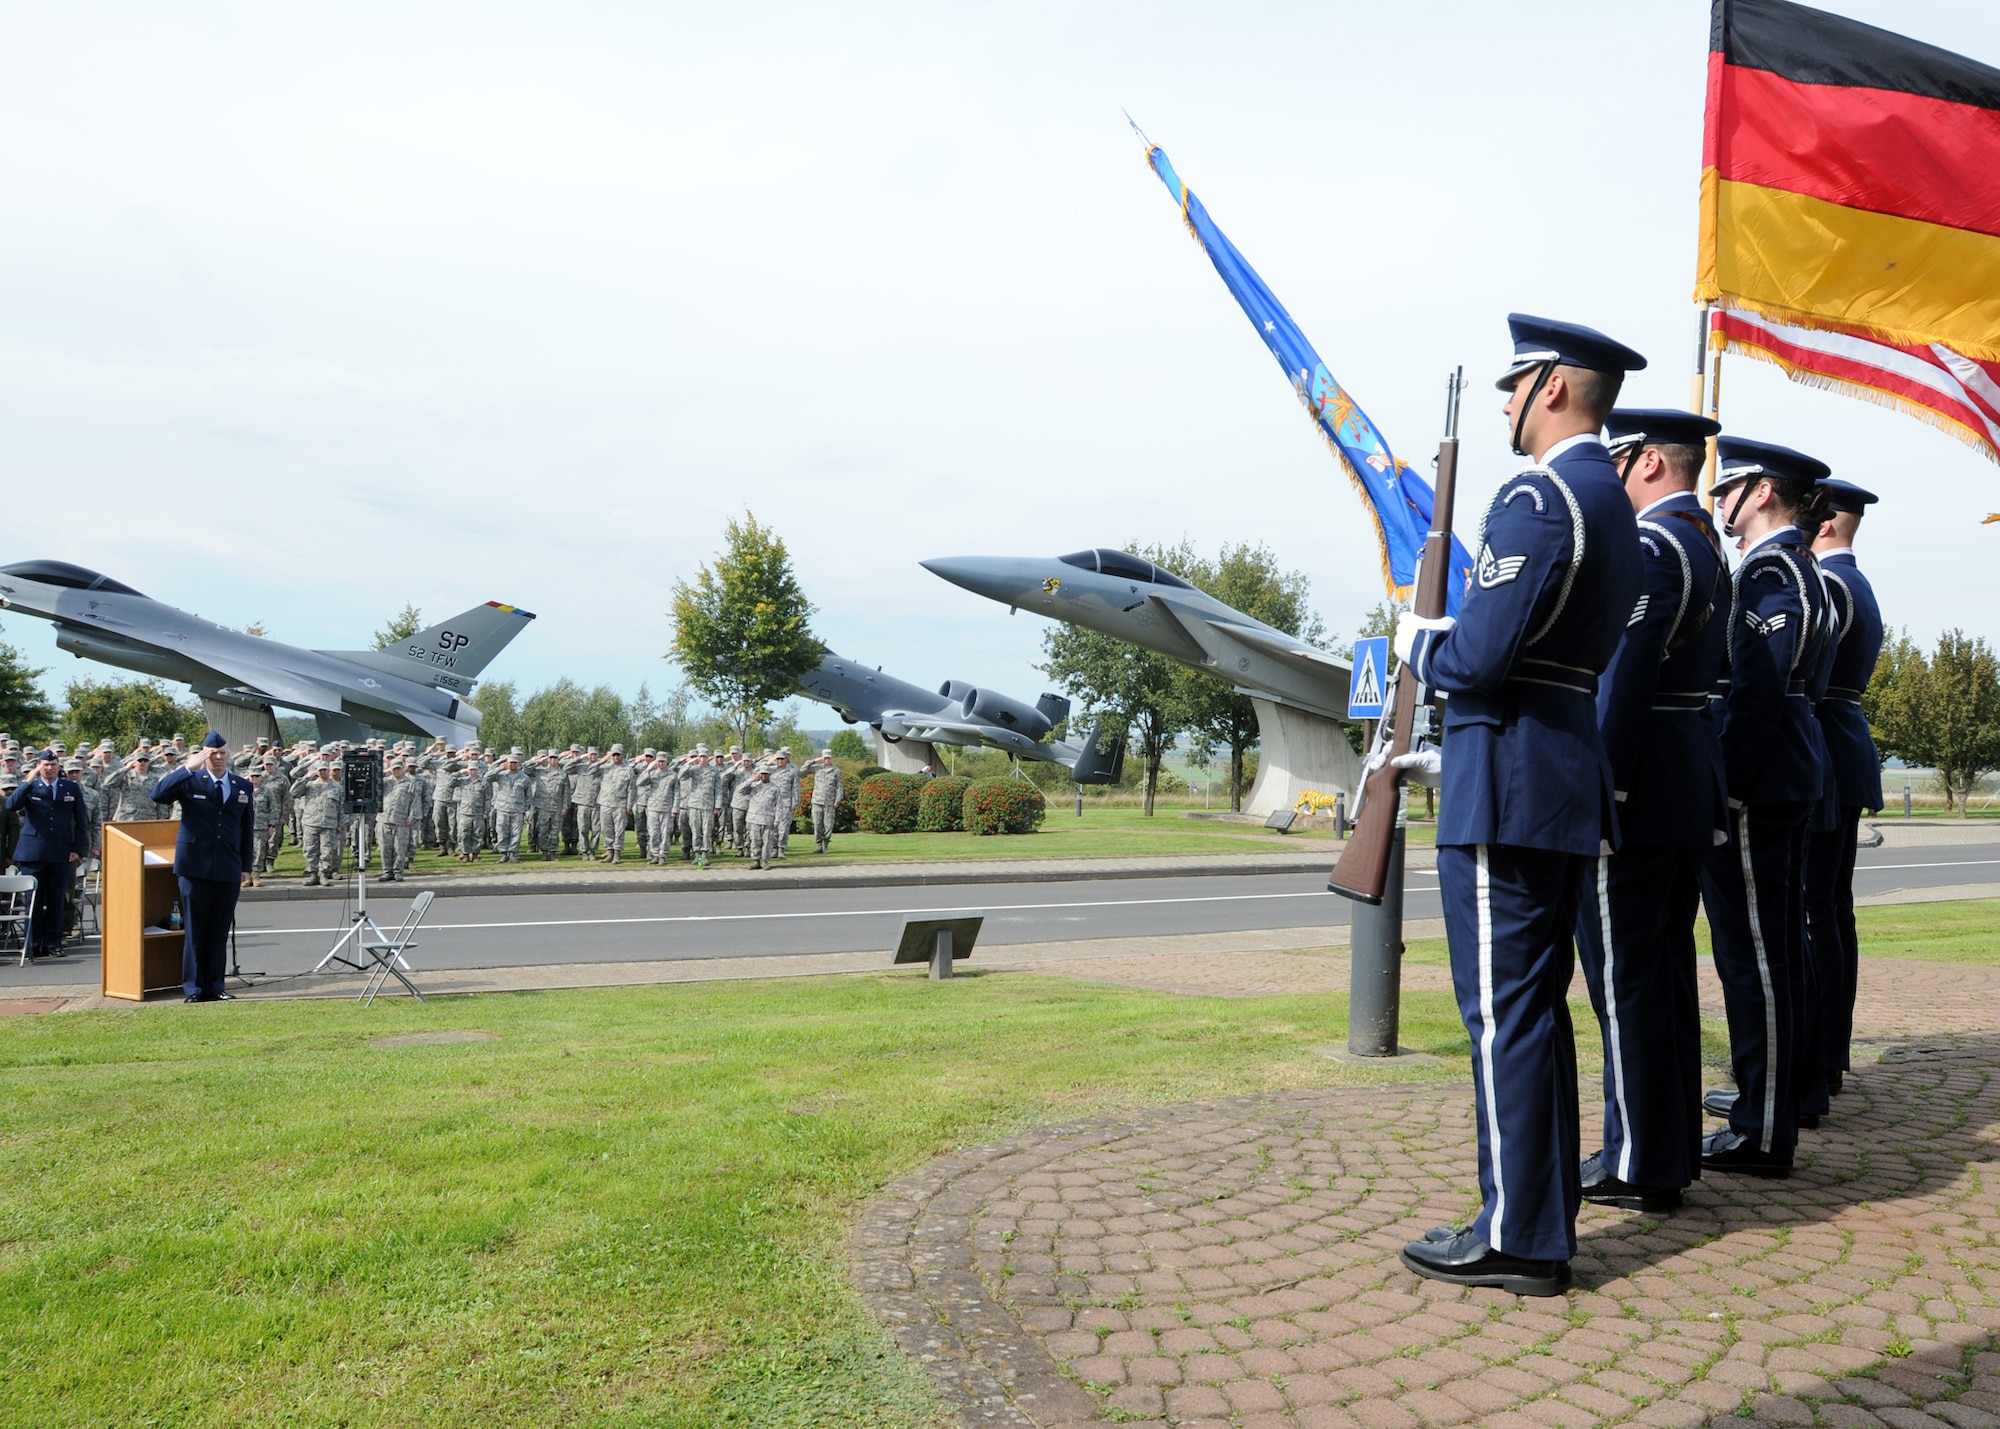 SPANGDAHLEM AIR BASE, Germany - 52nd Fighter Wing Honor Guard members post the colors as 52nd FW members salute during the POW/MIA ceremony at the air park here Sept. 16. The ceremony is held every year to remember those who have served and been taken prisoner or have been listed as missing in action. (U.S. Air Force photo/Senior Airman Christopher Toon) 